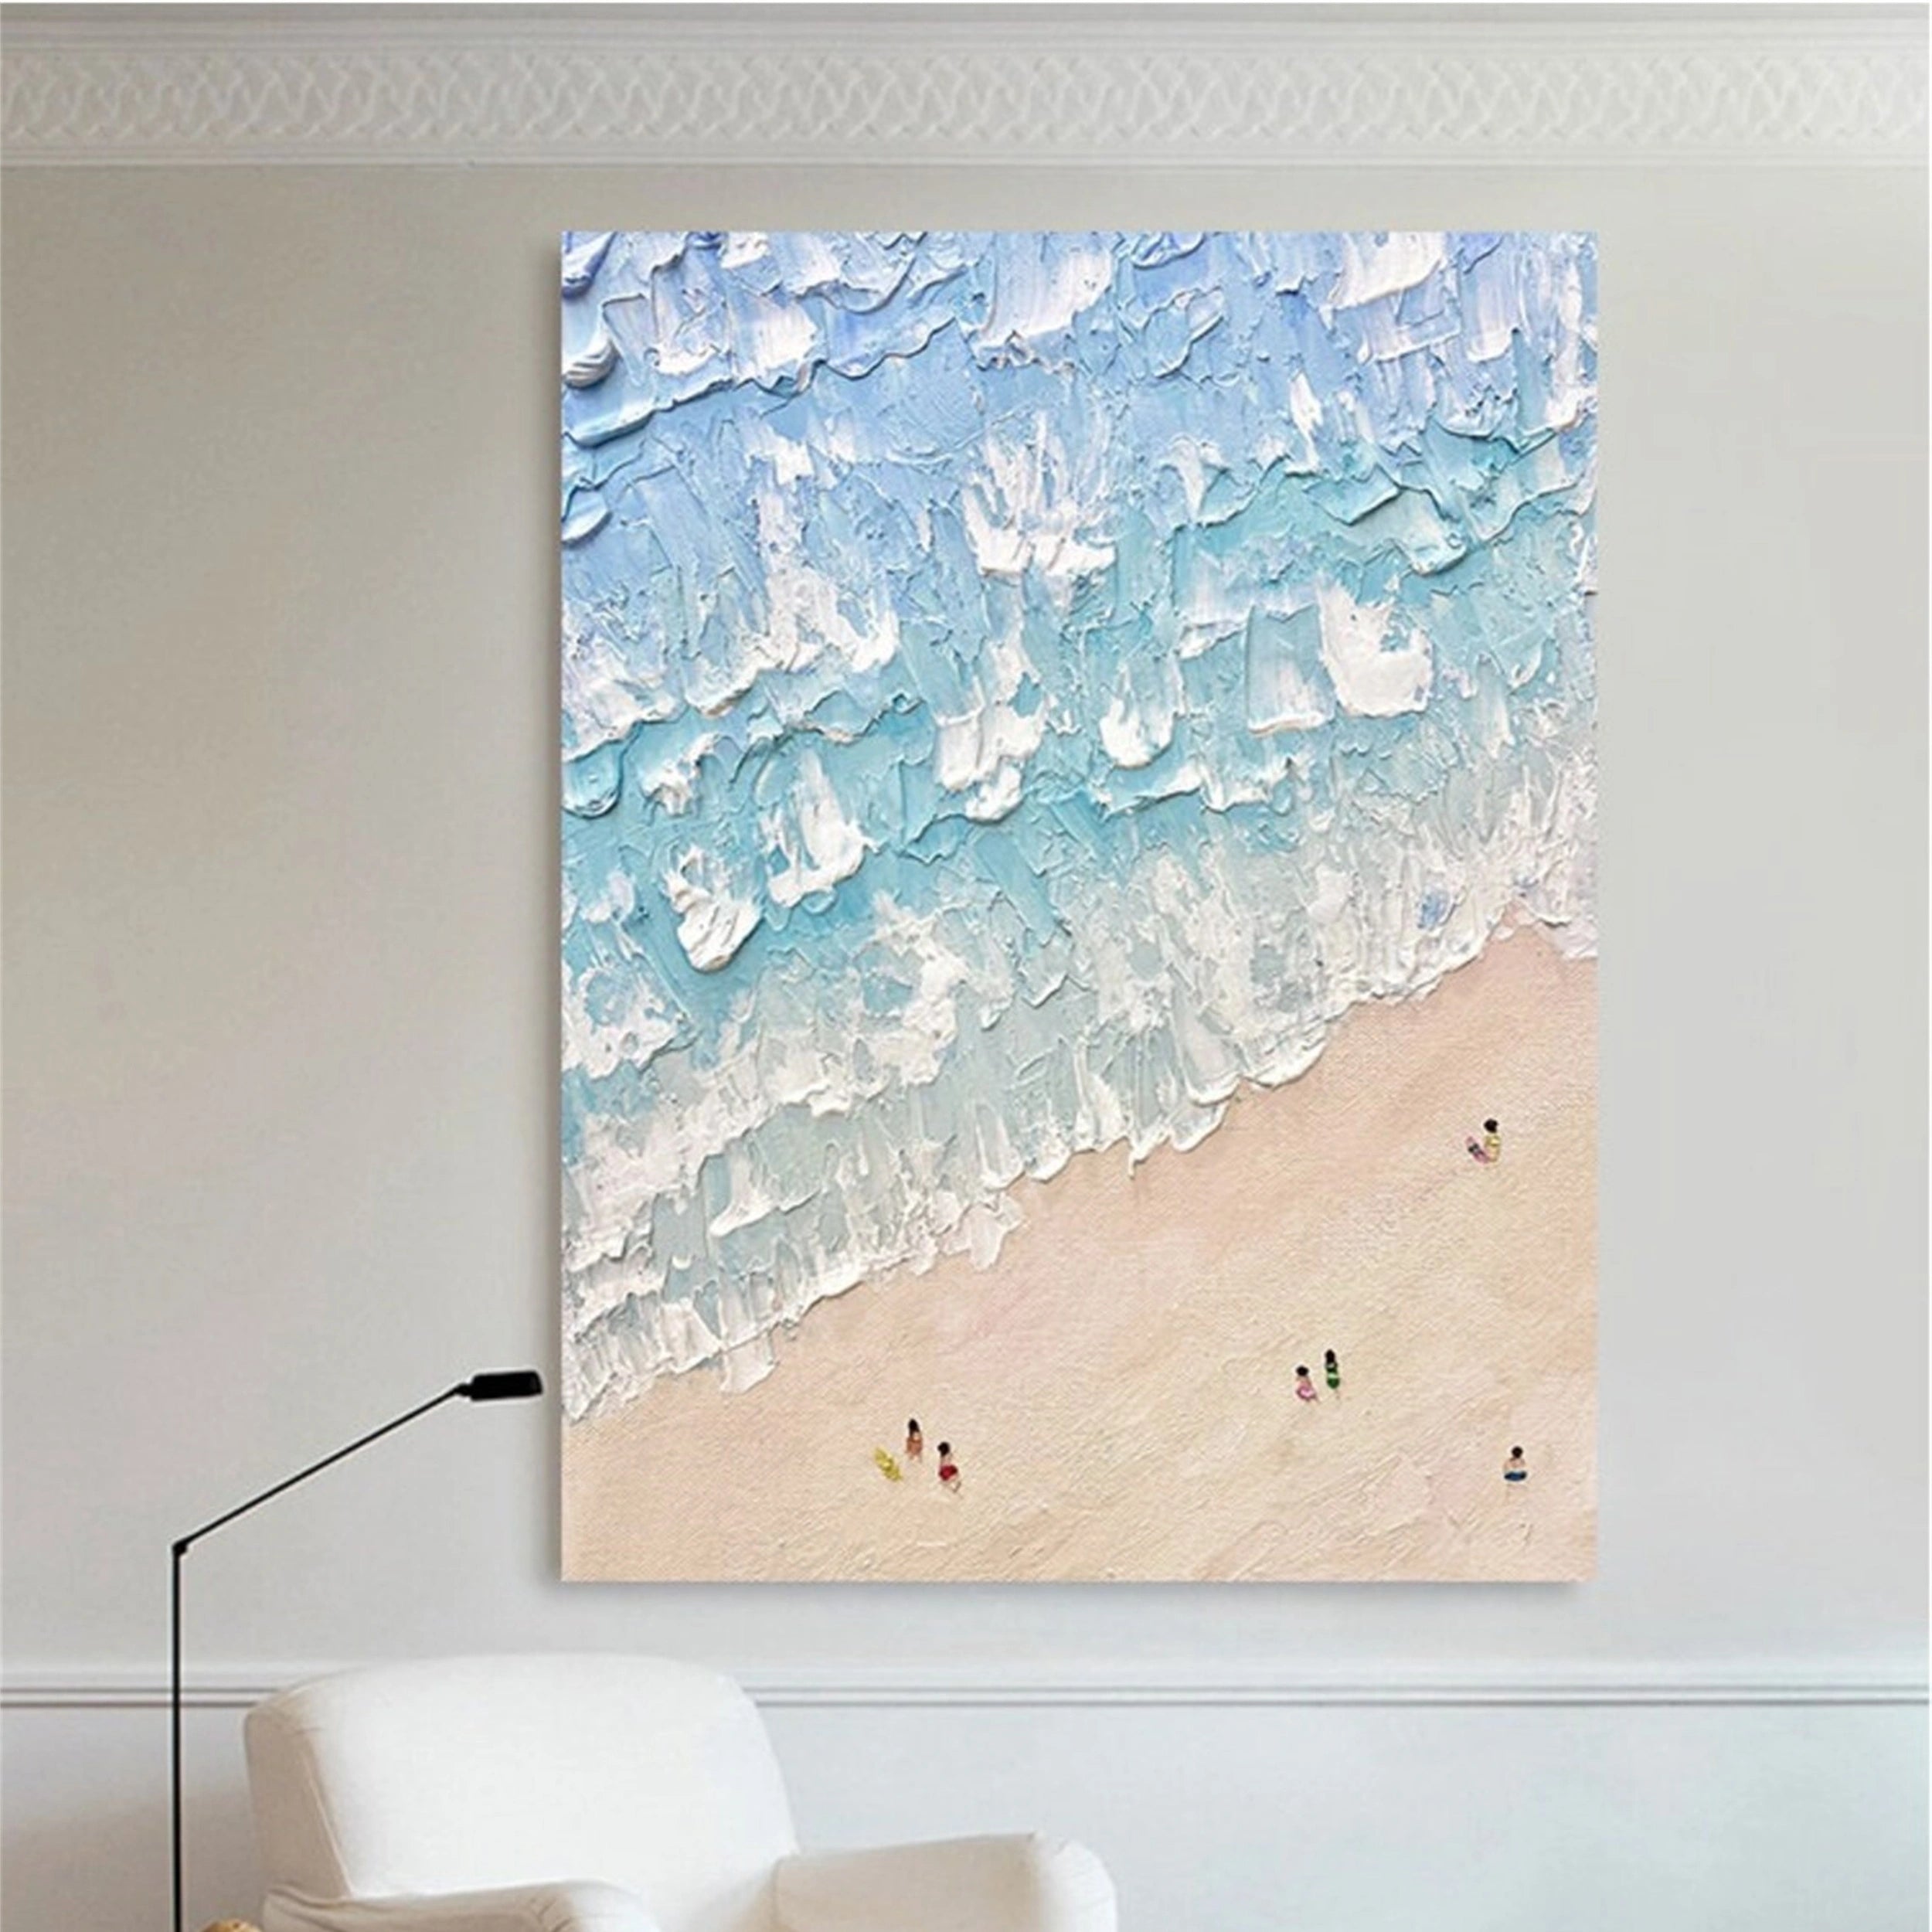 Ocean And Sky Painting #OS 043